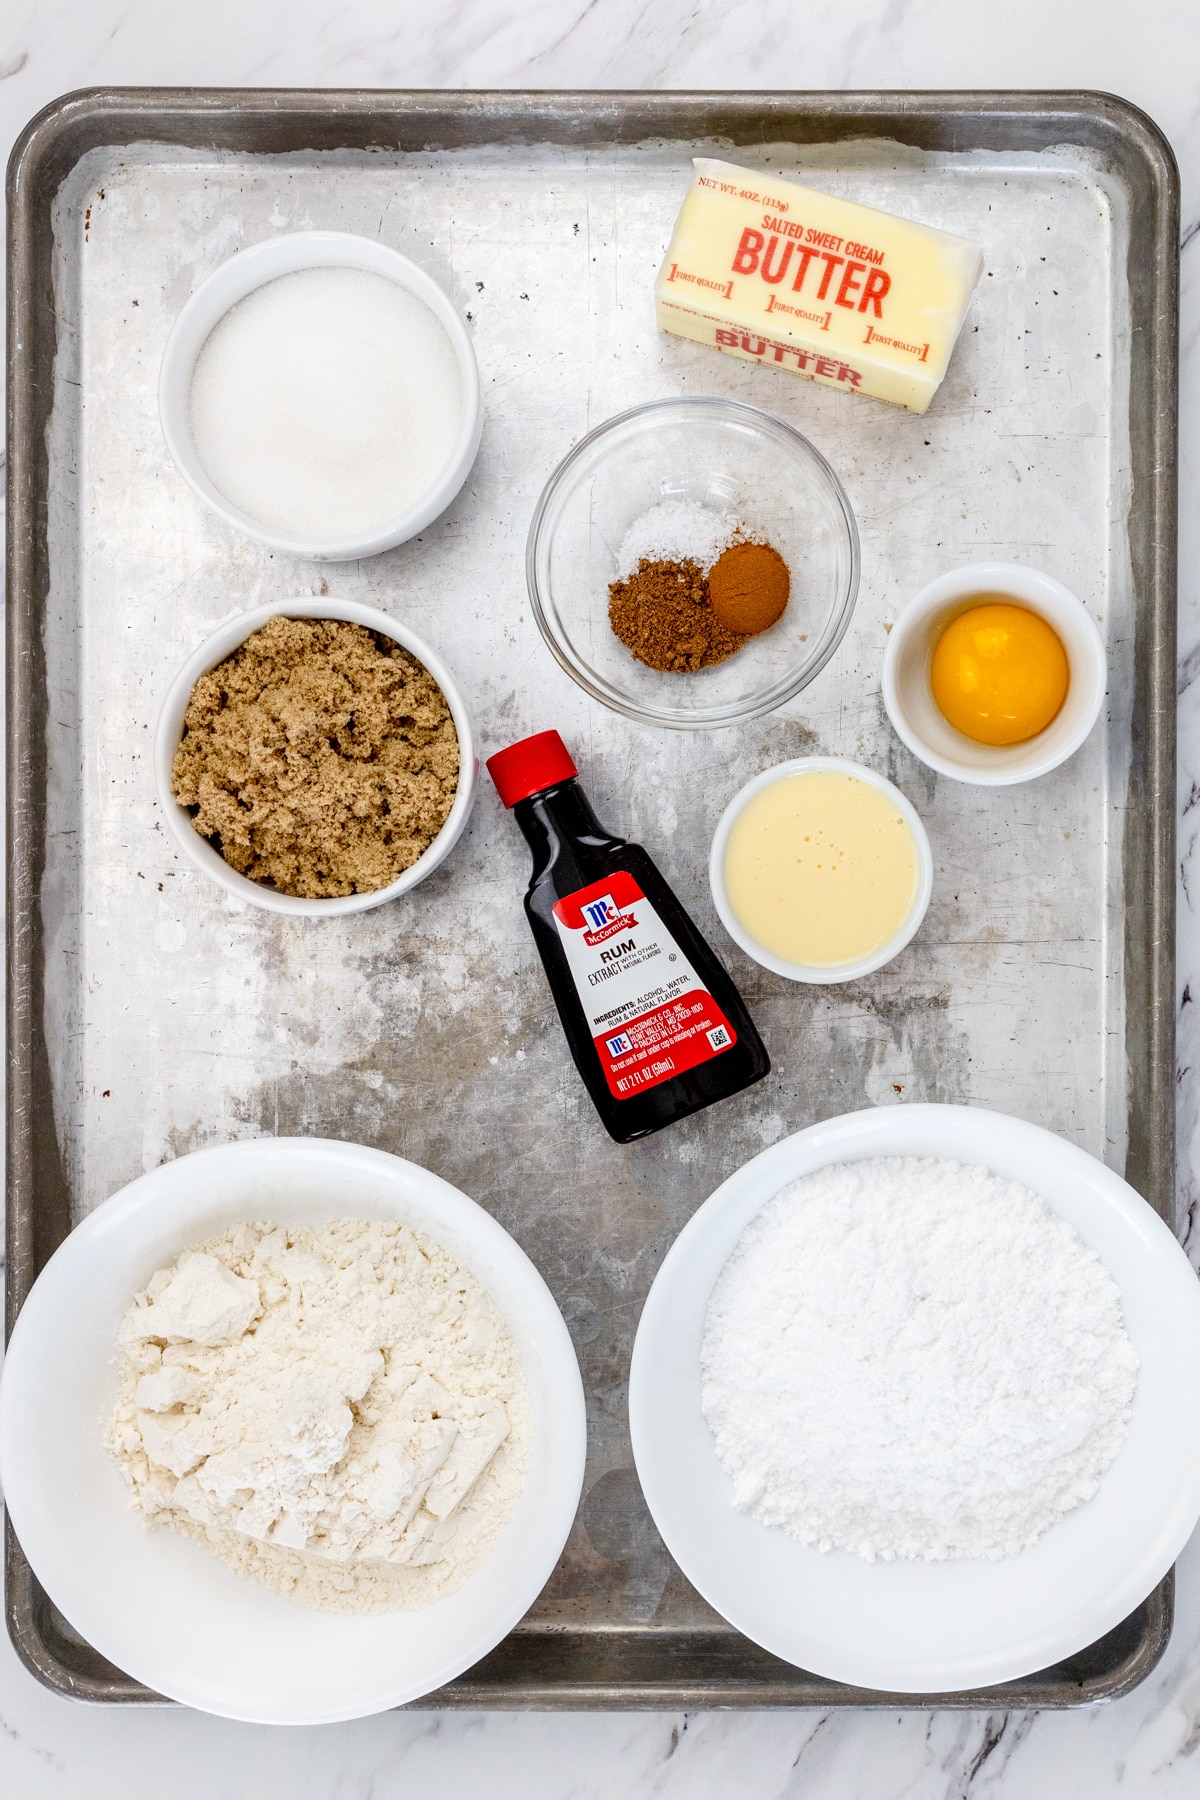 Top view of ingredients needed to make Eggnog Thumbprint Cookies in small bowls on a baking tray.